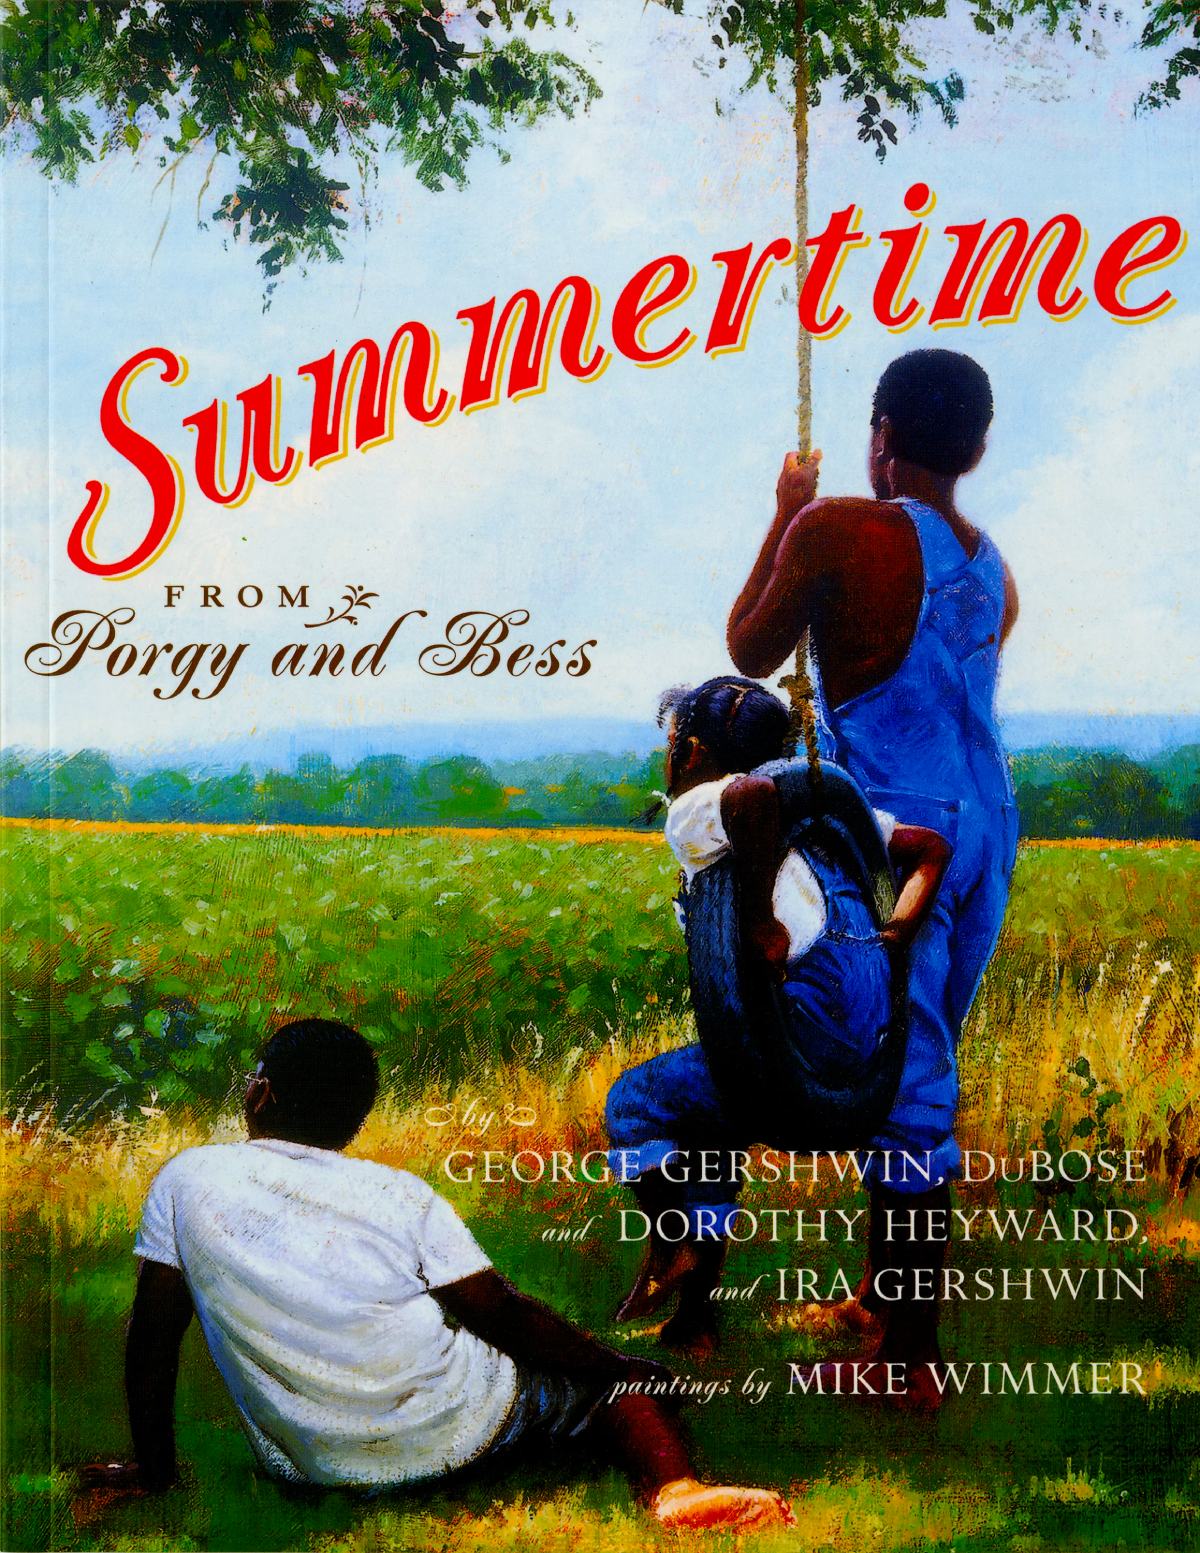 Cover of George Gershwin's "Summertime."